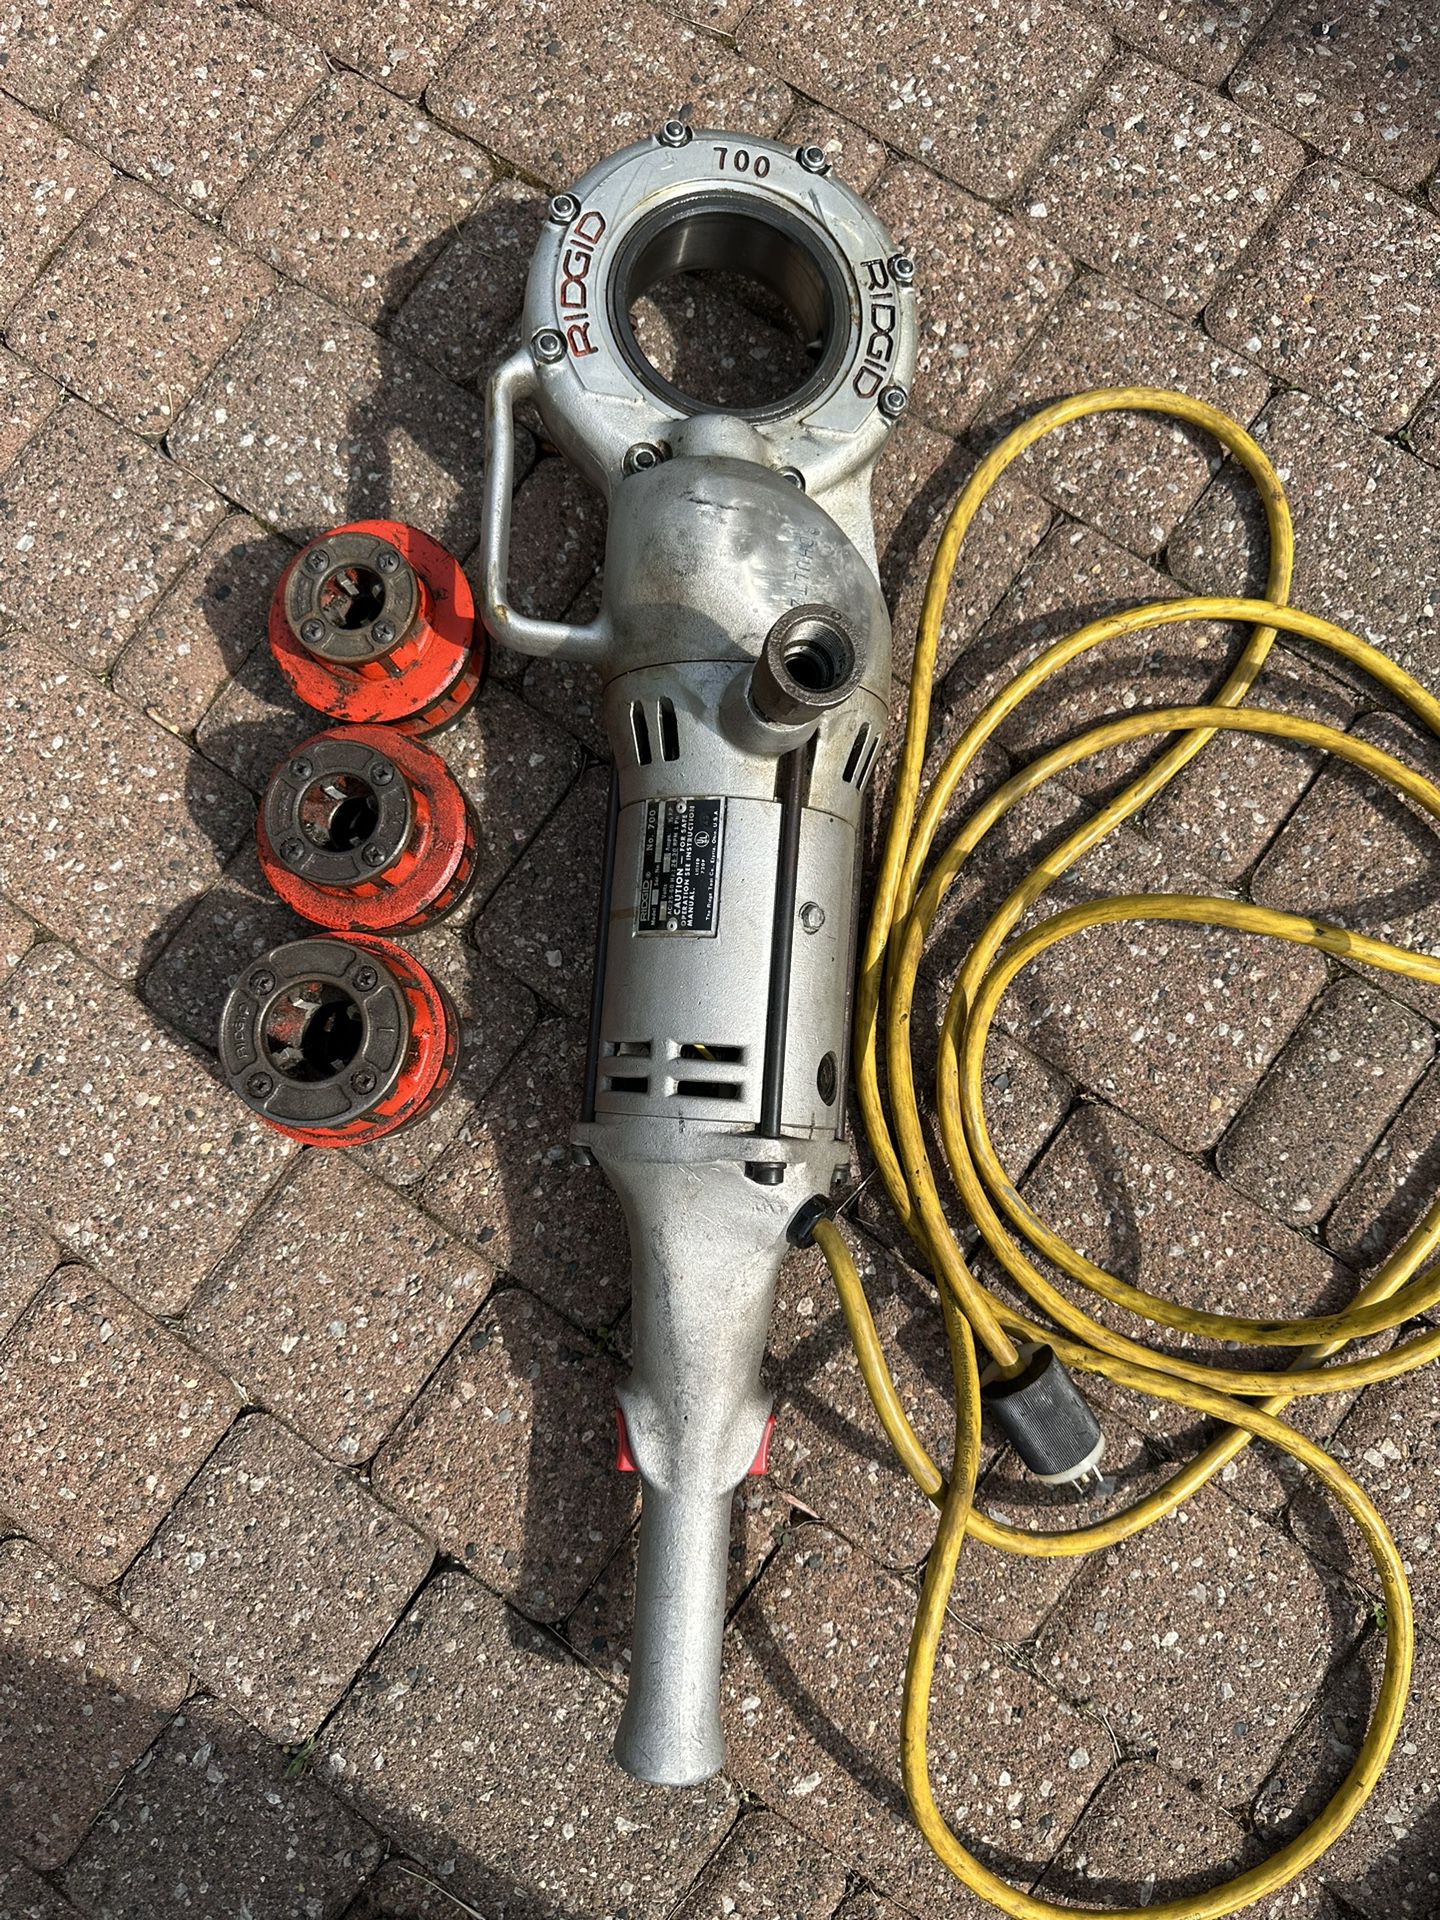 Ridgid 700 Model A pipe threader with 3 dies 1/2” 3/4” 1”. Works great. $850